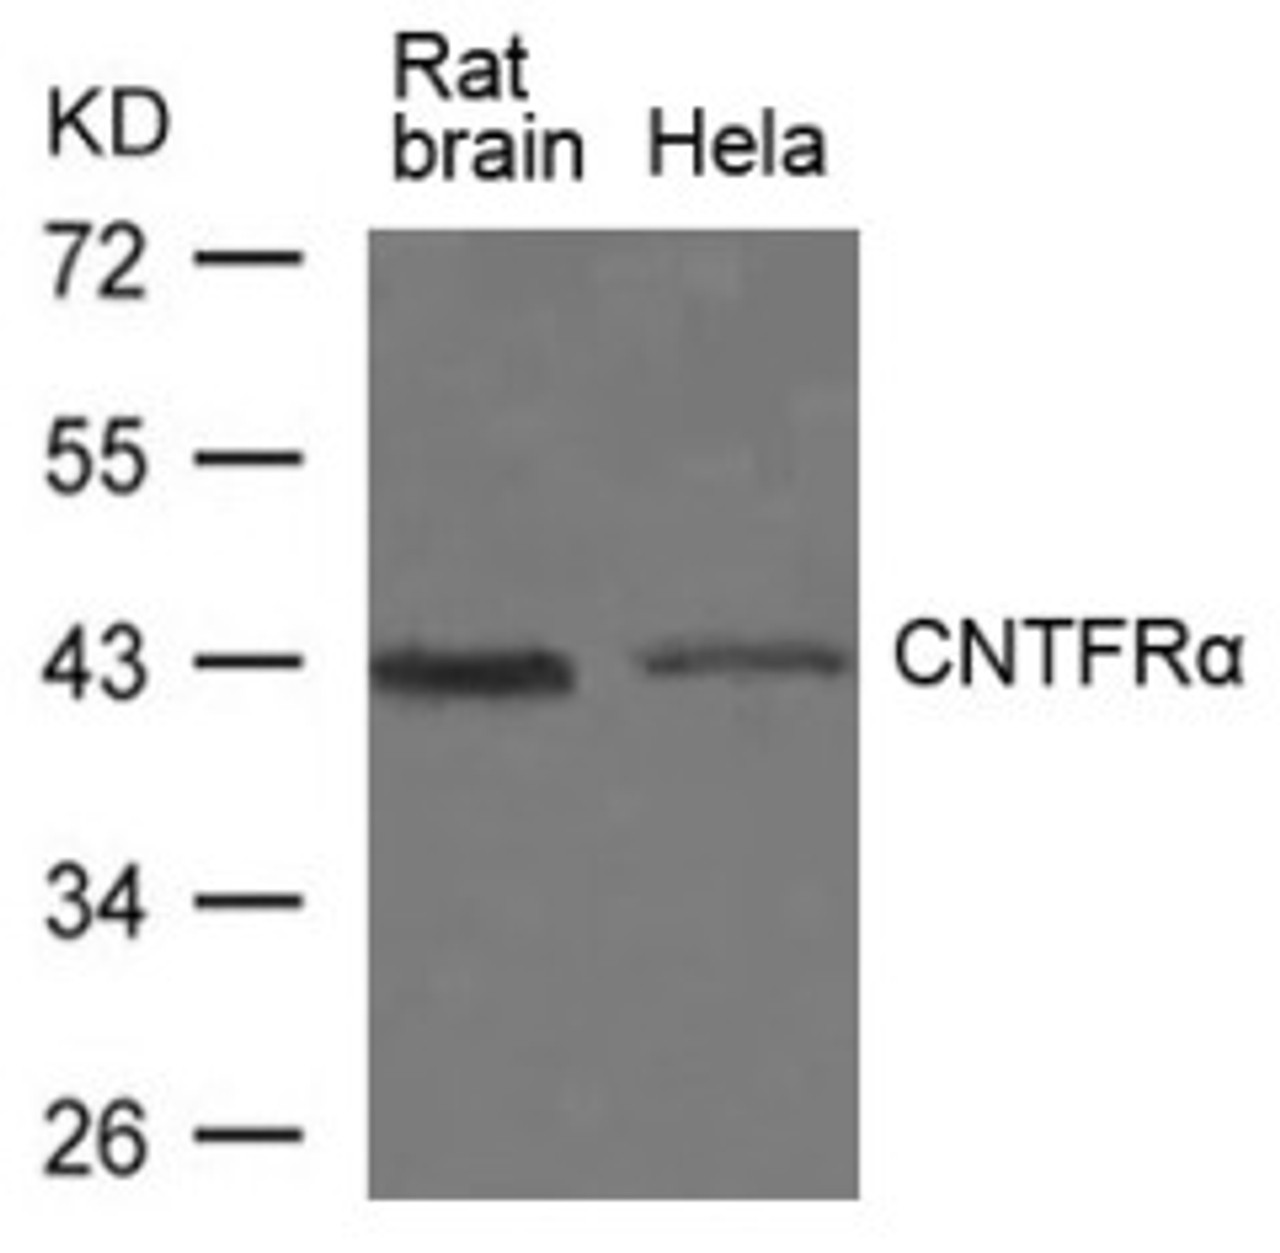 Western blot analysis of lysed extracts from Rat brain tissue and HeLa cells using CNTFR&#945; Antibody.